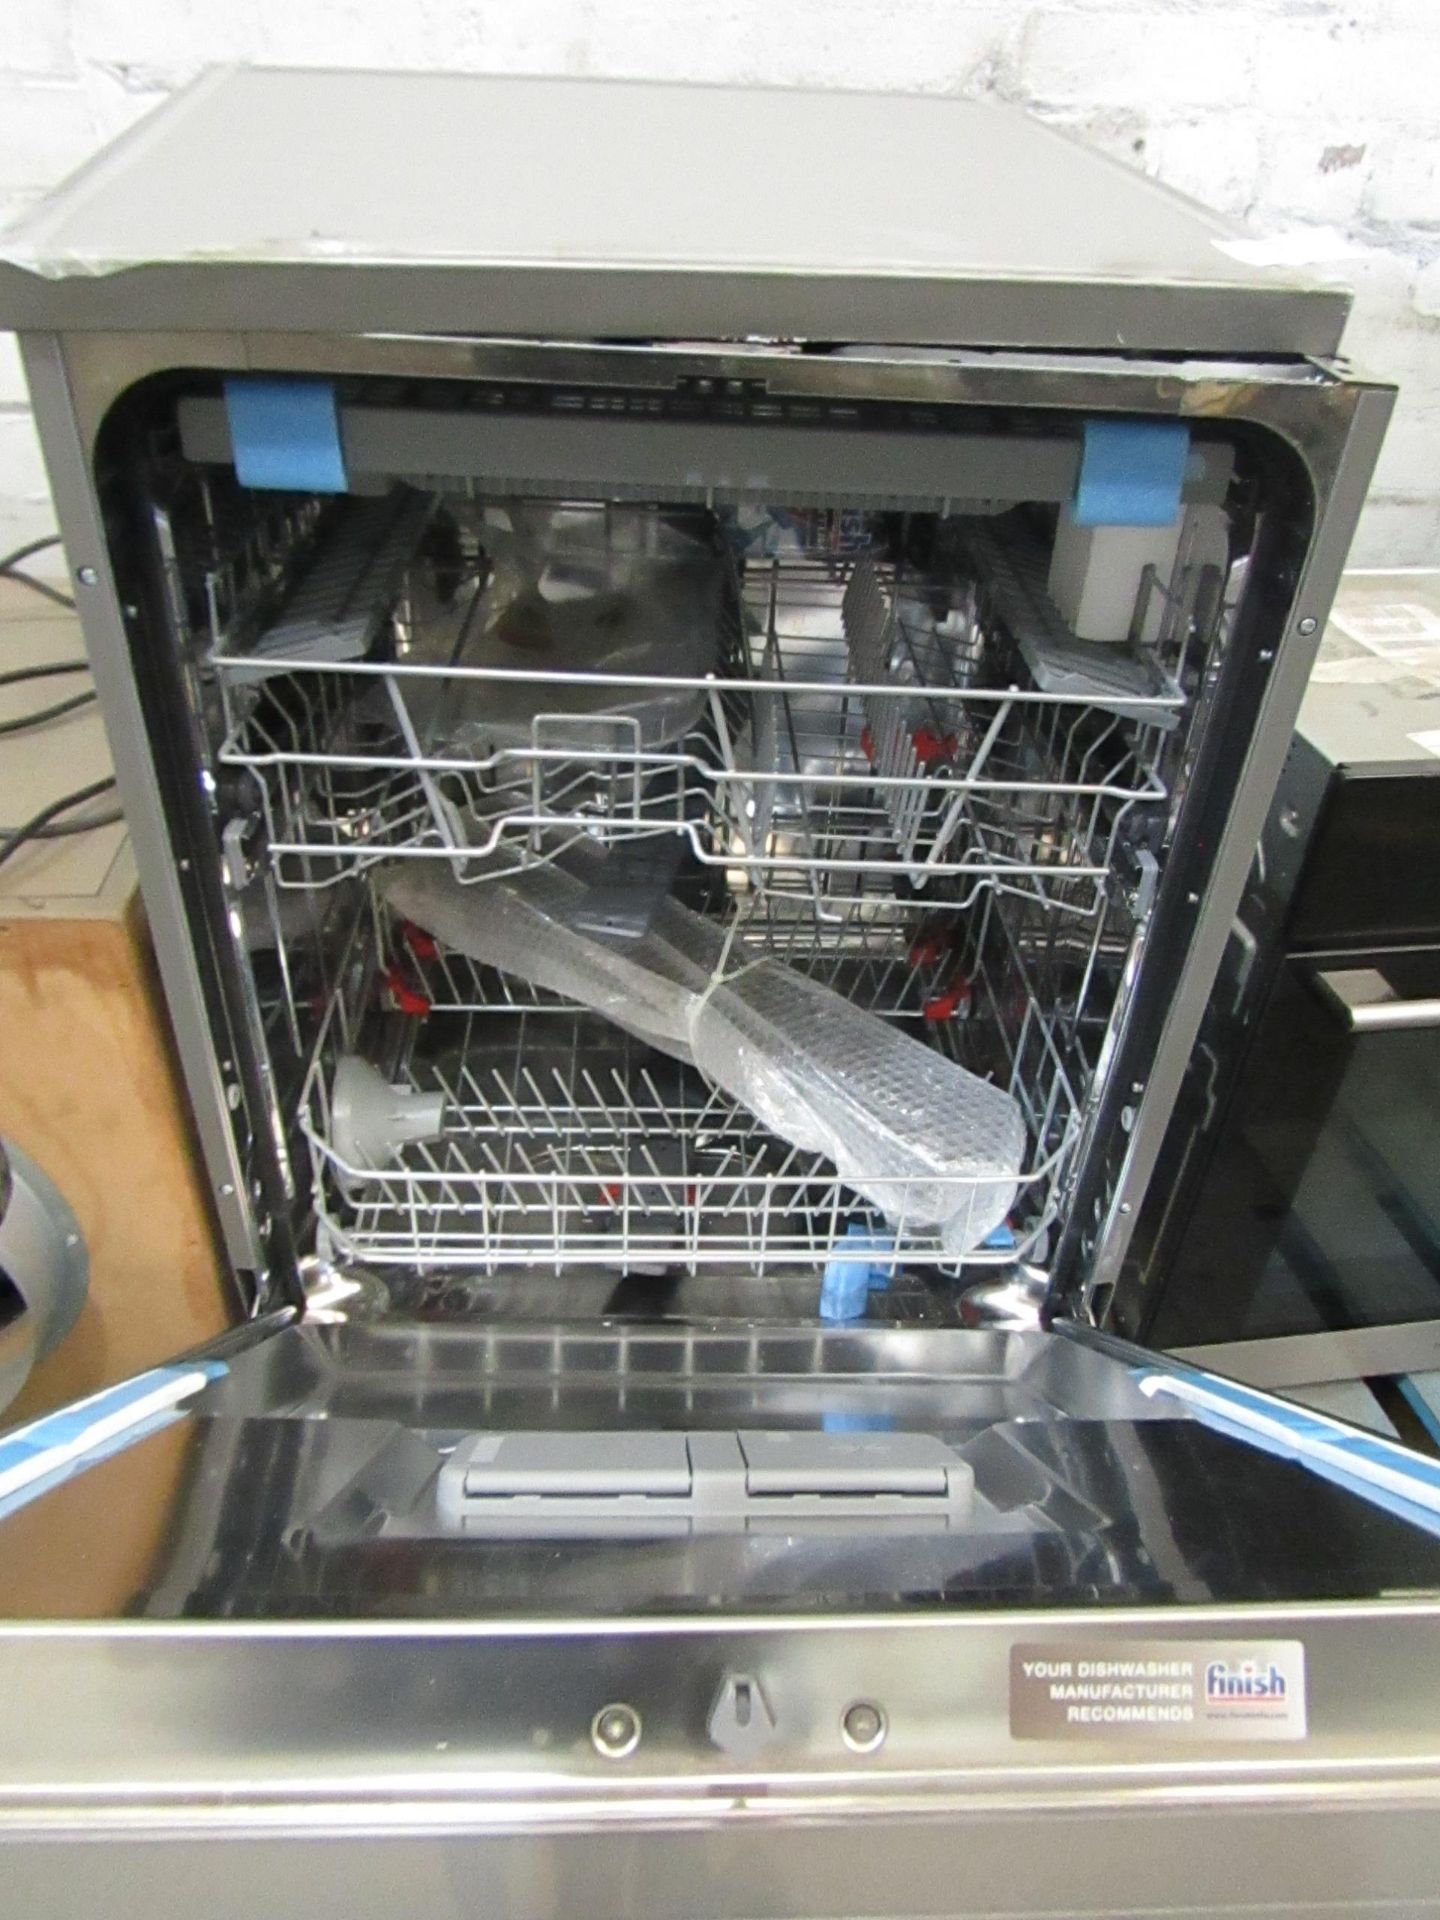 Hisense - Dishwasher - Item Has No Power & Top Cover Is Loose. - Image 2 of 2